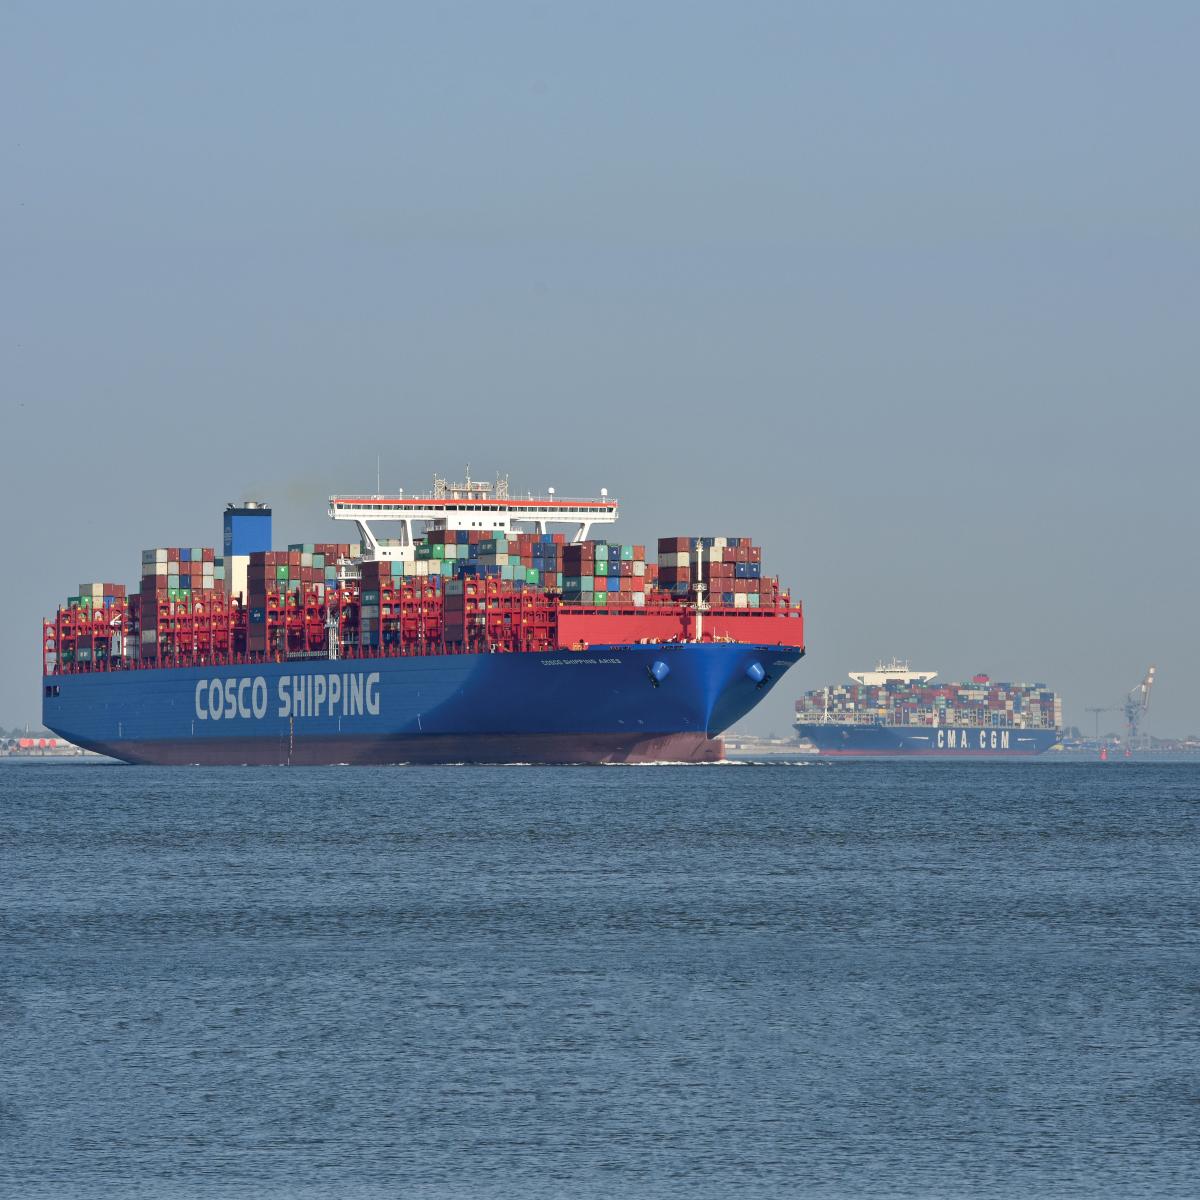 COSCO Shipping container ship Aries & CMA CGM container ship Bougainville upstreaming the river Elbe